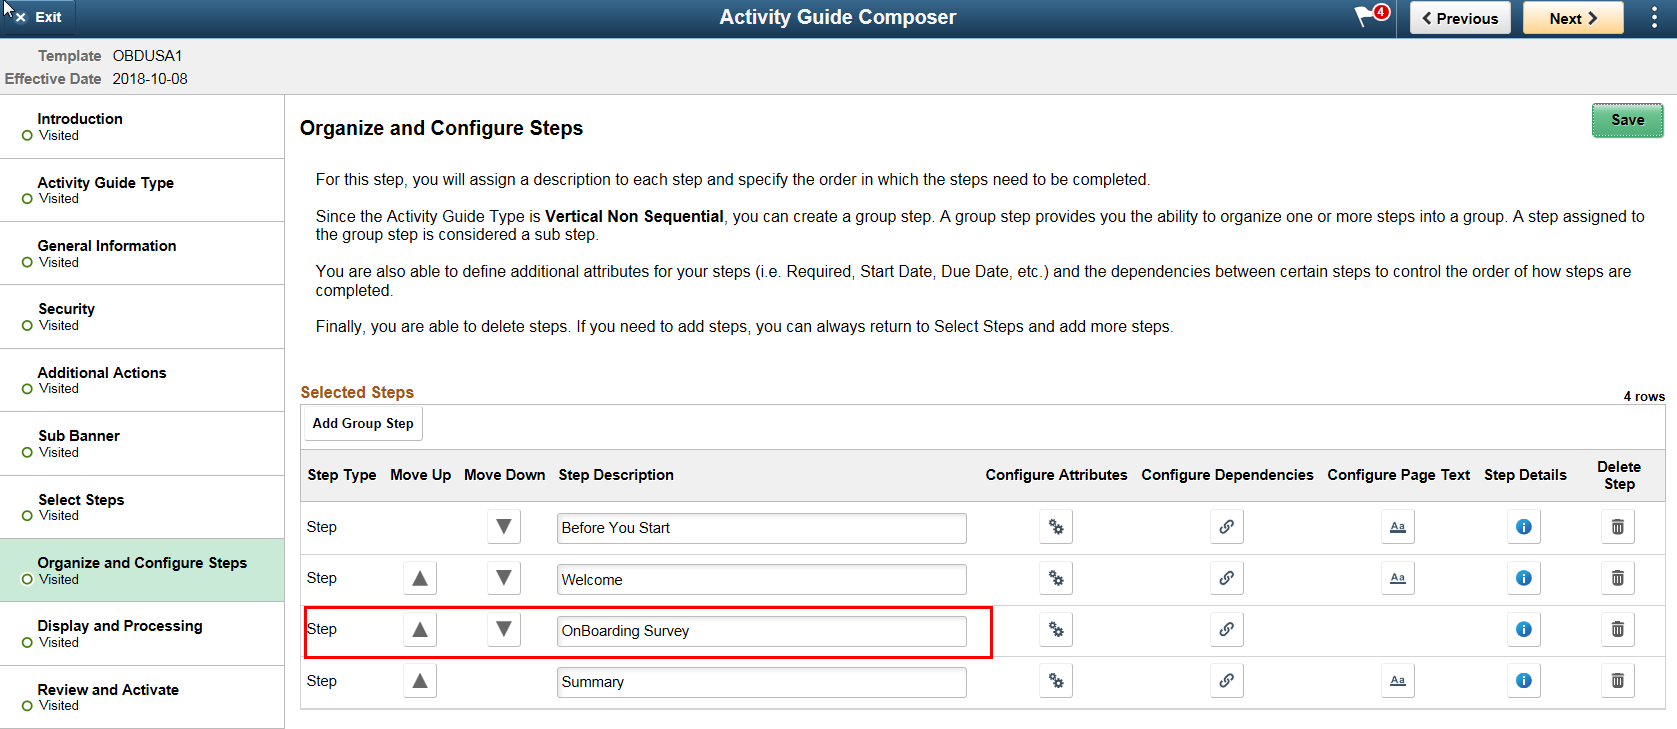 Organize and Configure Steps